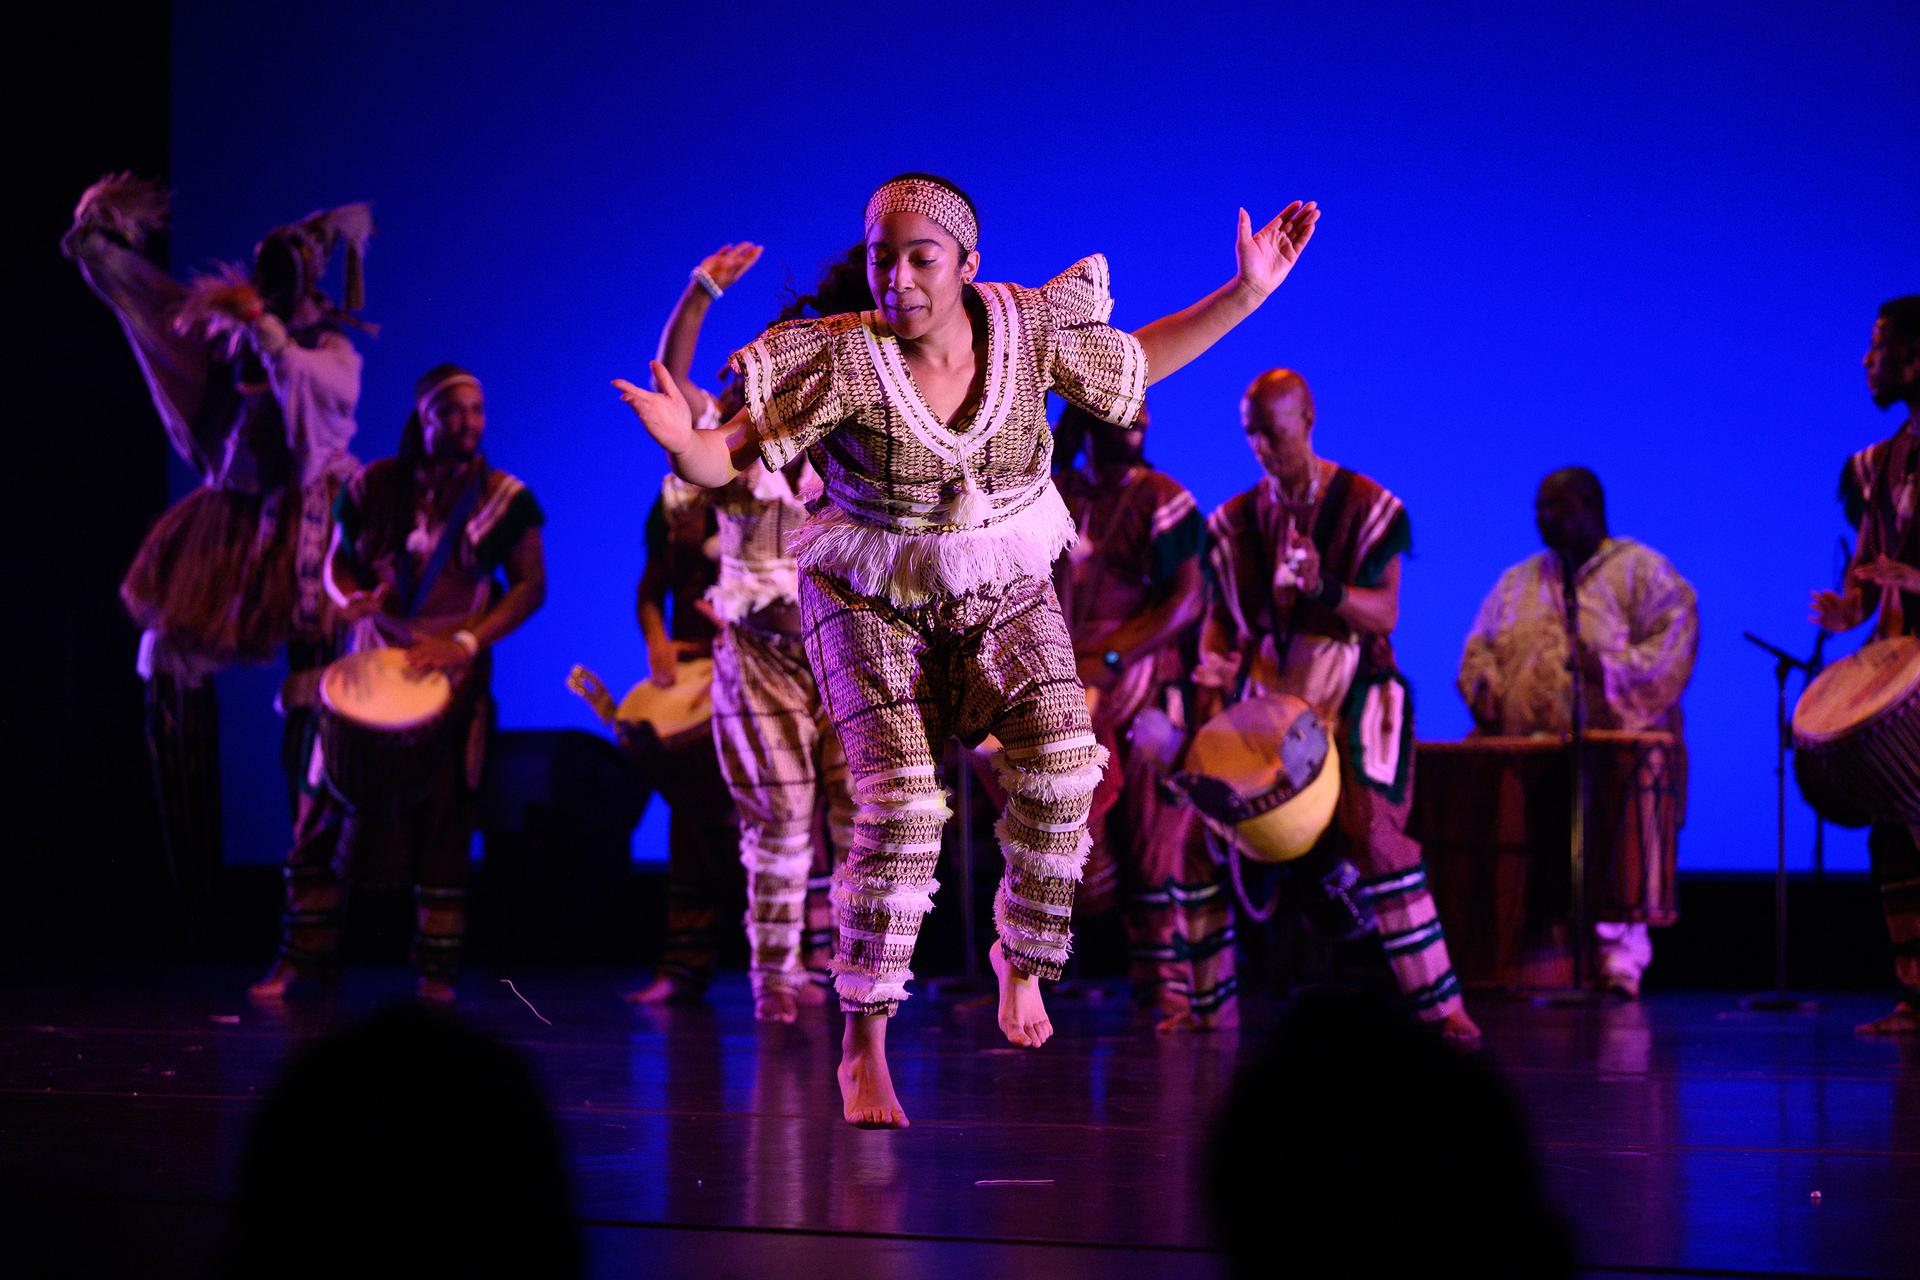 DanceAfrica on stage, movement and music